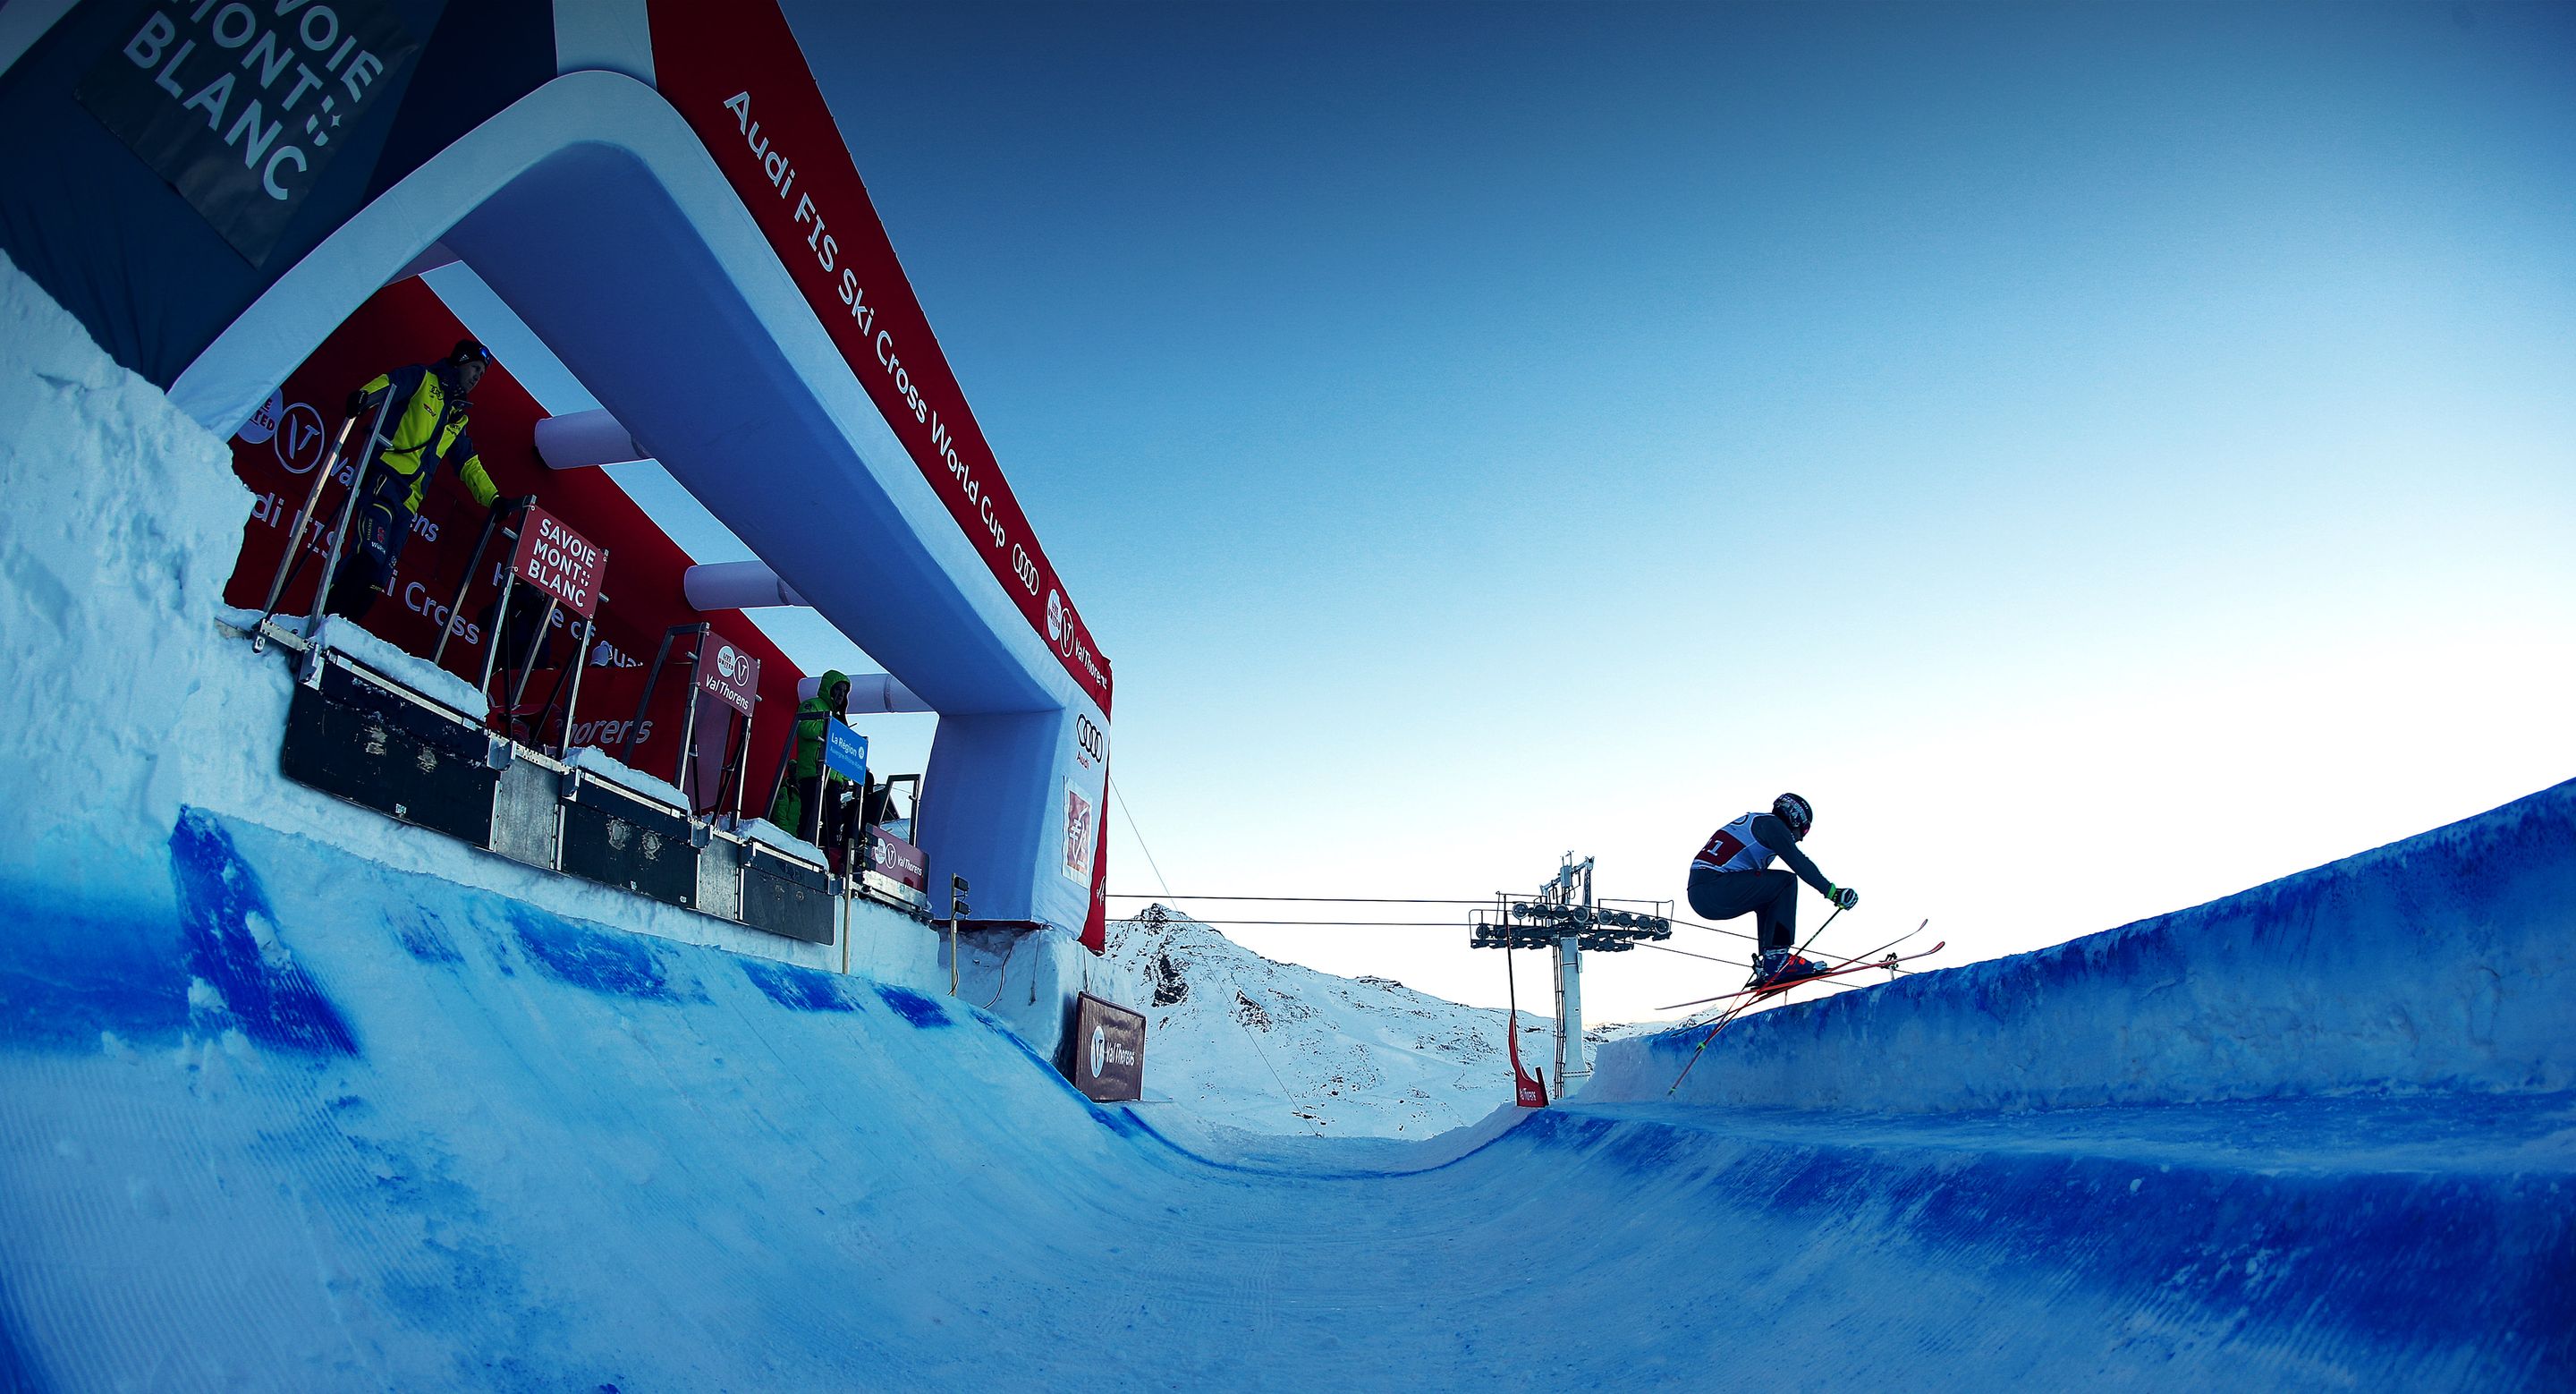 © GEPA - Val Thorens is ready for take-off for the Audi FIS Ski Cross World Cup season 2019/20